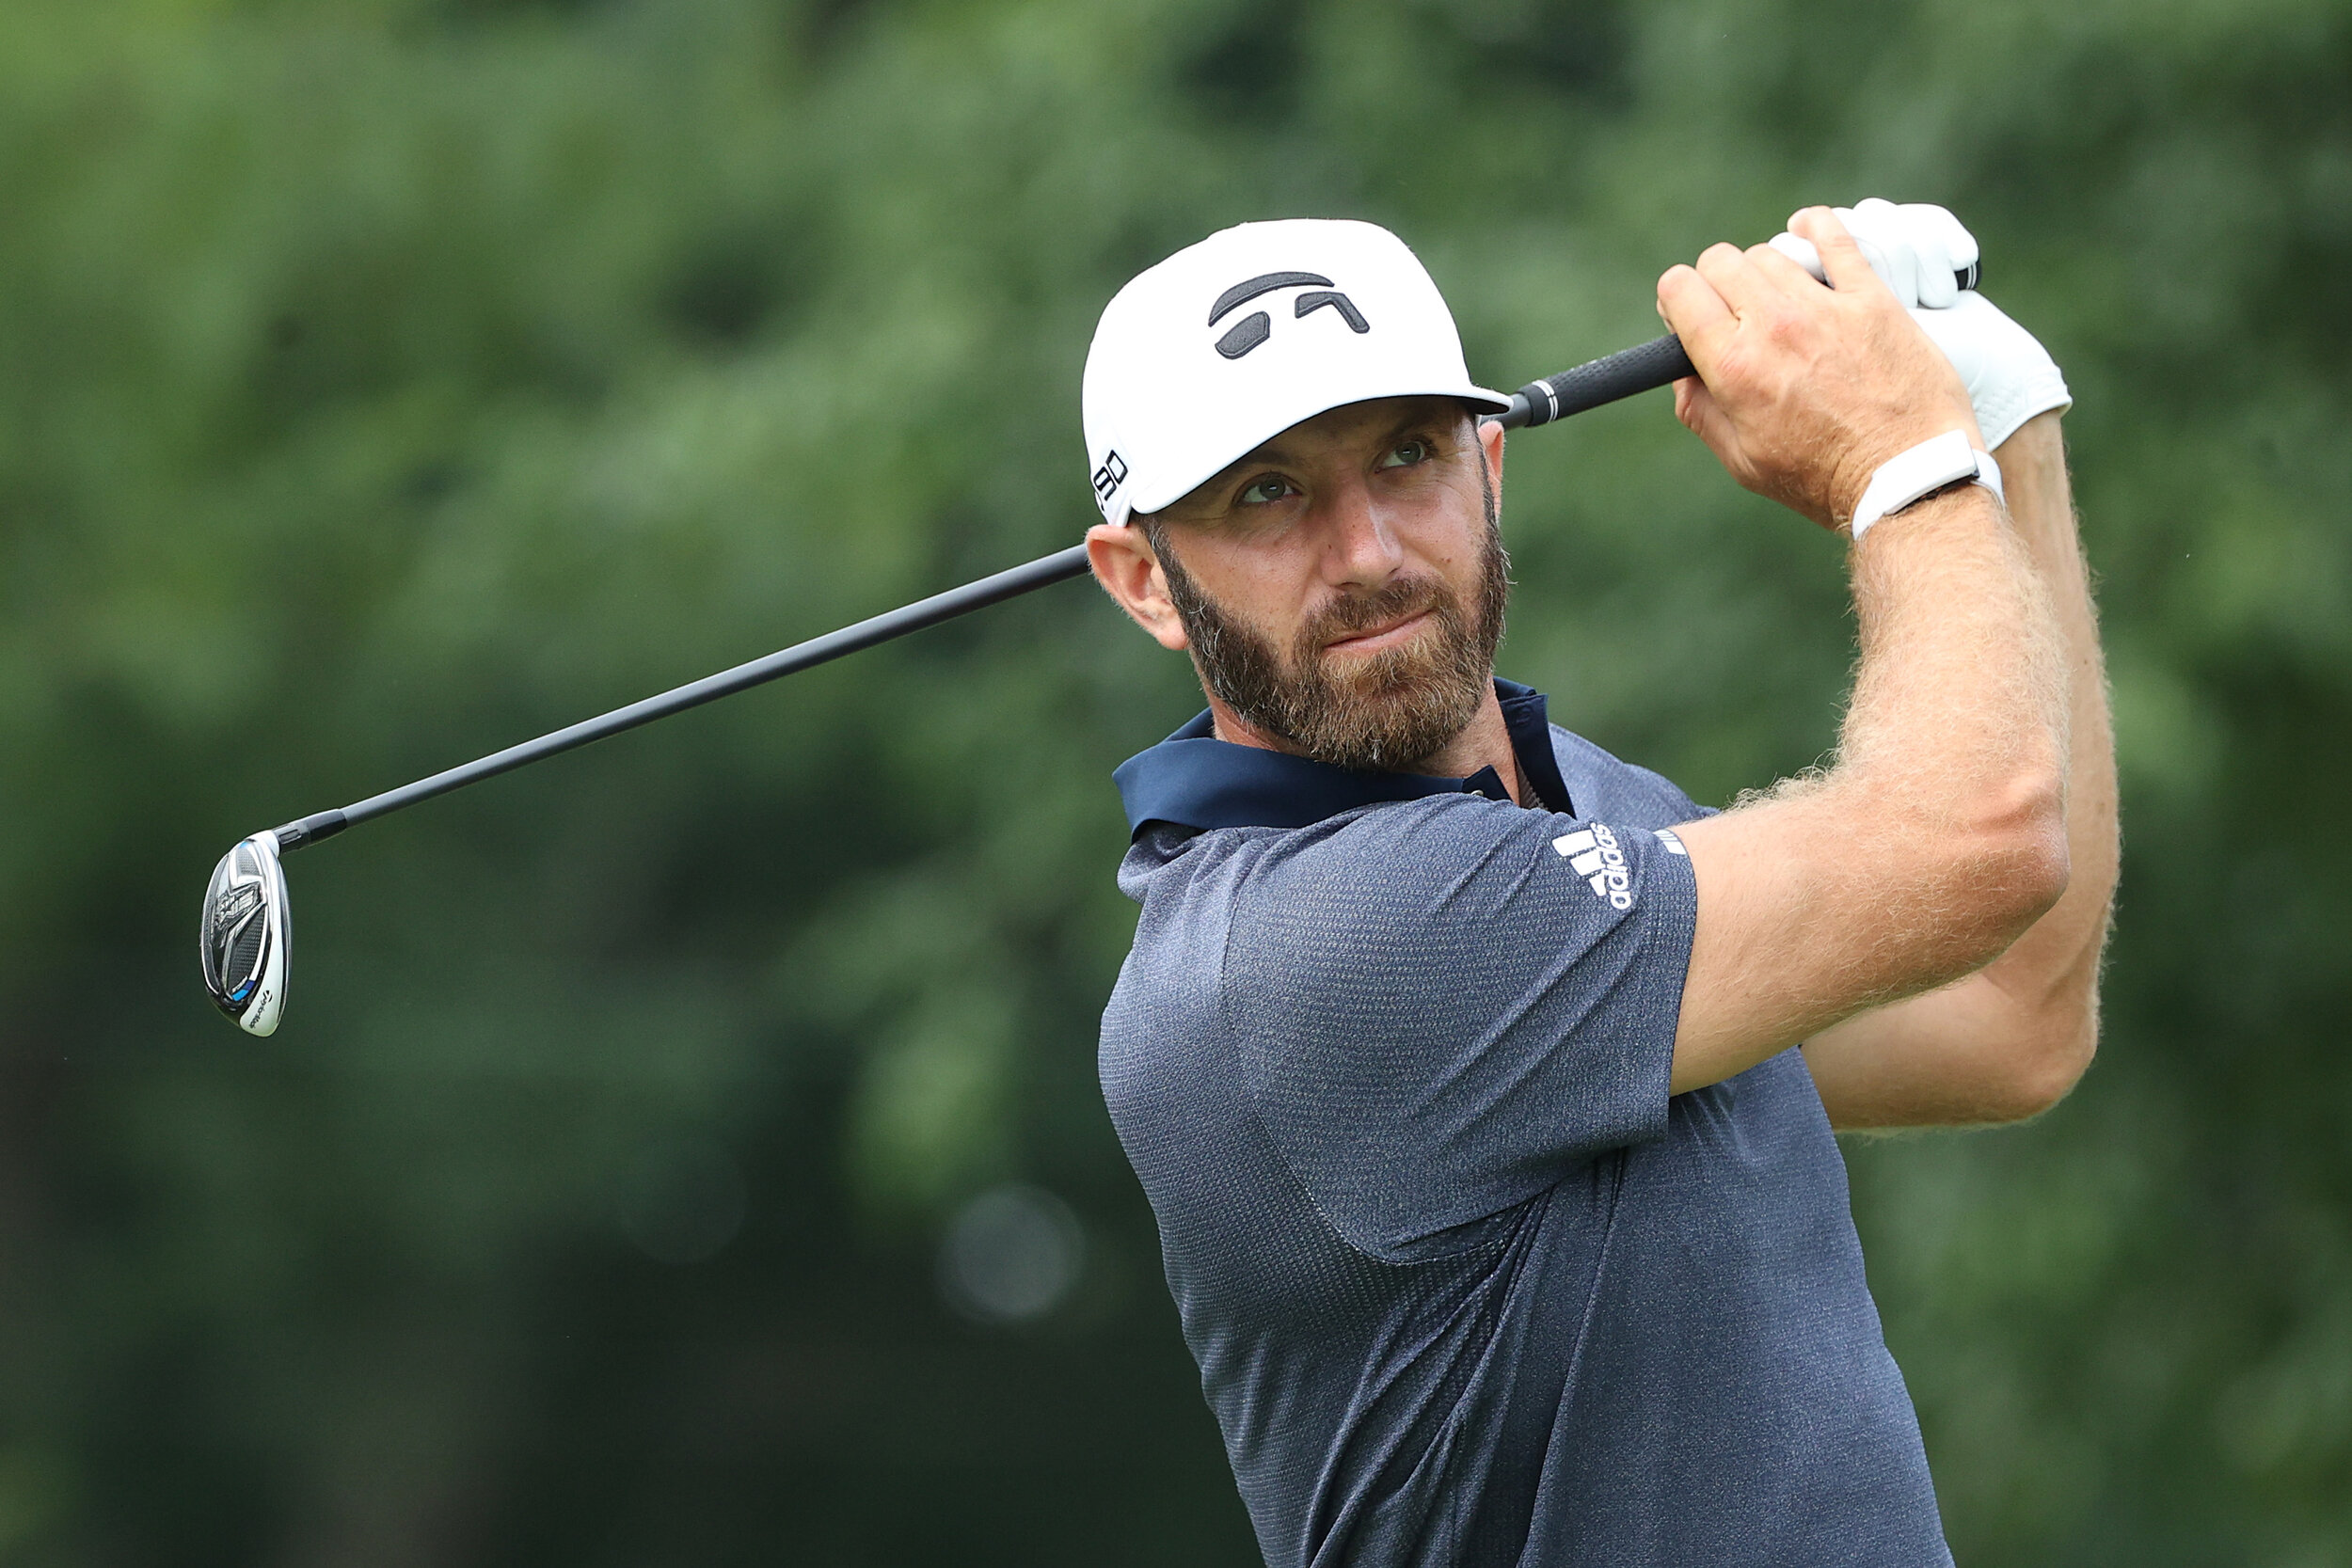  CROMWELL, CONNECTICUT - JUNE 27: Dustin Johnson of the United States plays his shot from the seventh tee during the third round of the Travelers Championship at TPC River Highlands on June 27, 2020 in Cromwell, Connecticut. (Photo by Maddie Meyer/Ge